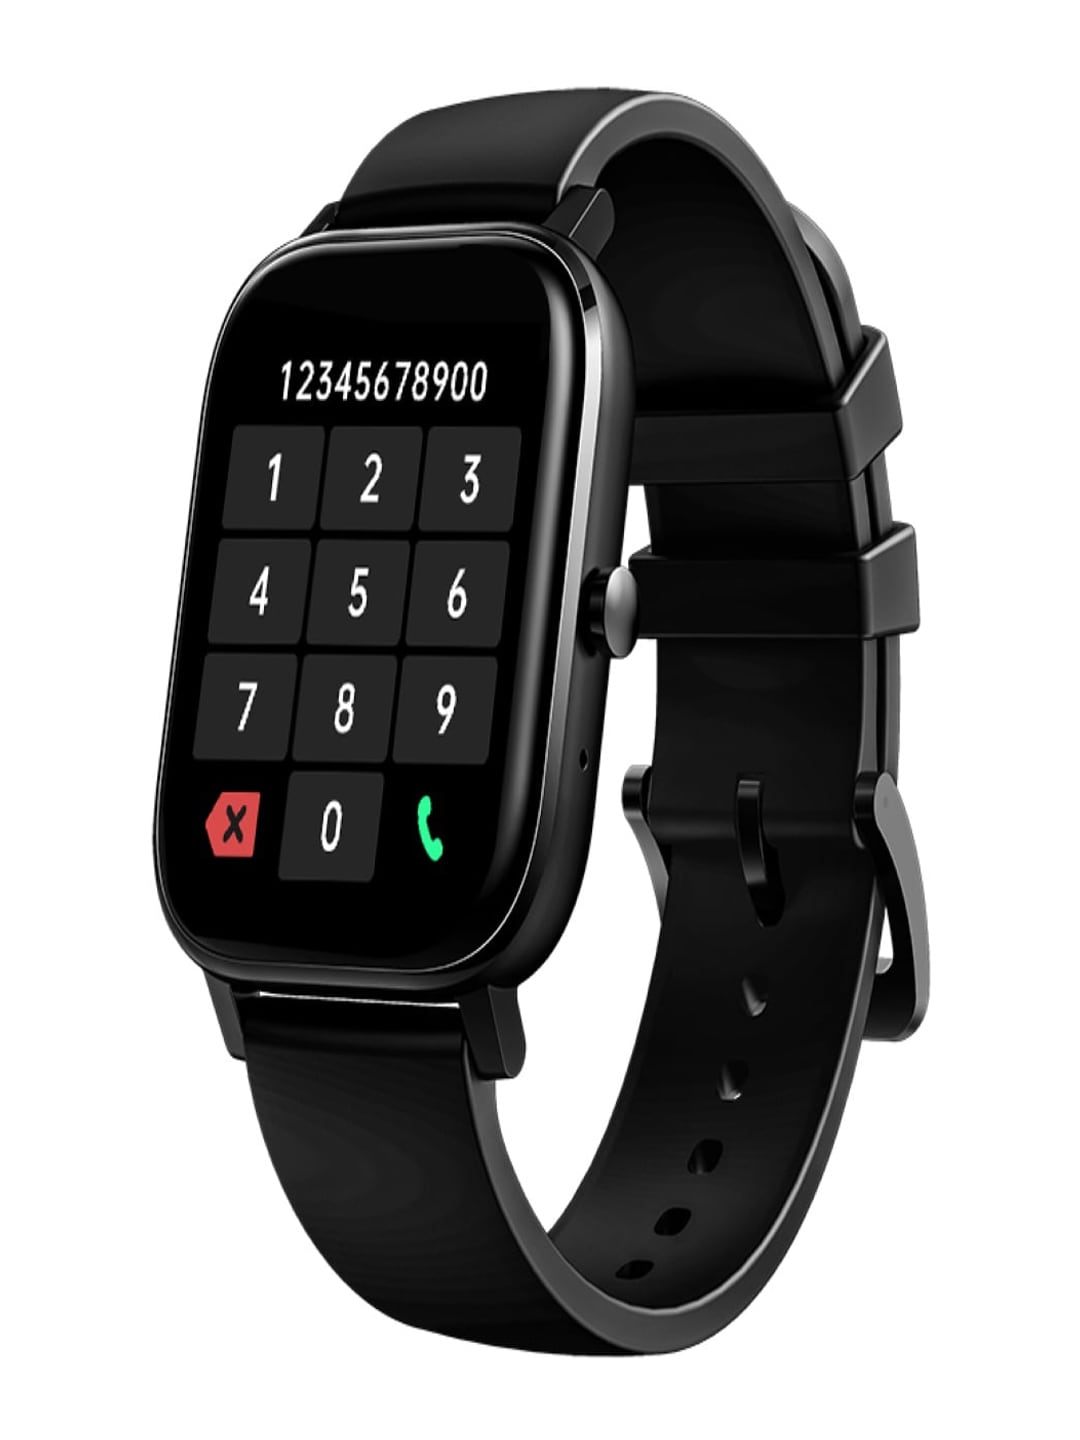 SHOPEVOLVES Black NextFIT Bluetooth Fitness Smart Watches Price in India